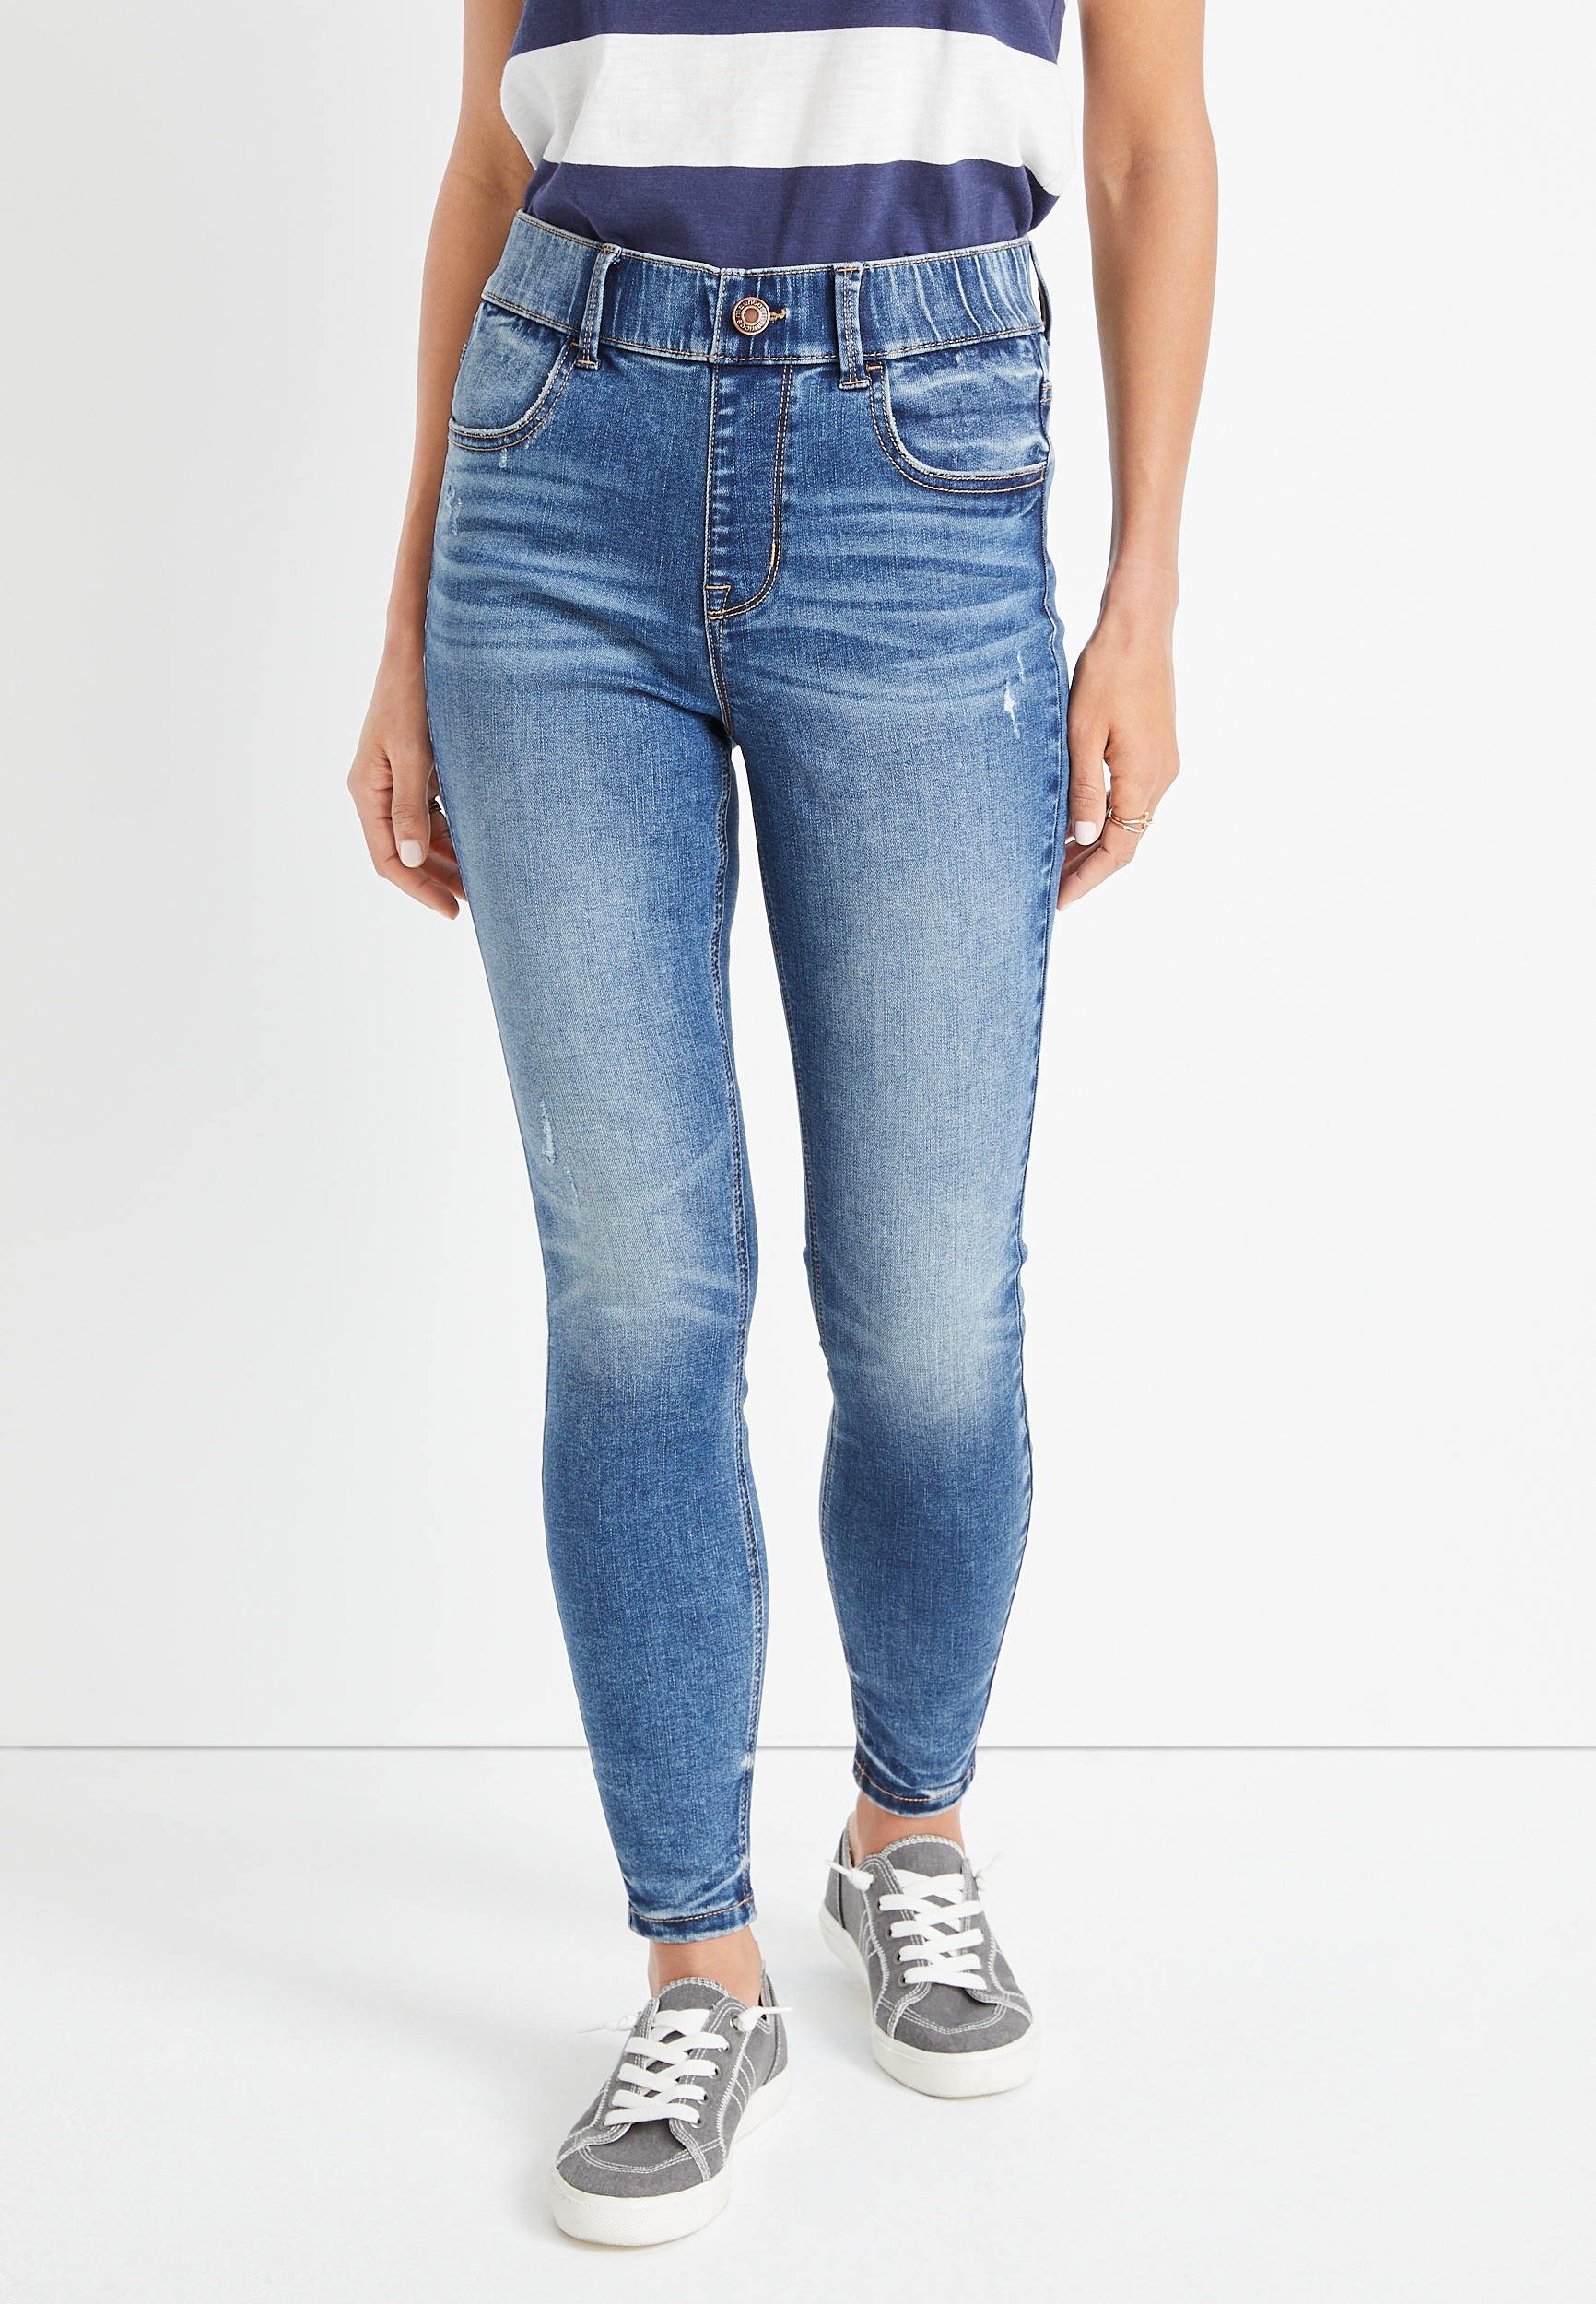 m jeans by mauricesâ¢ Cool Comfort Pull On Super High Rise Jegging | maurices